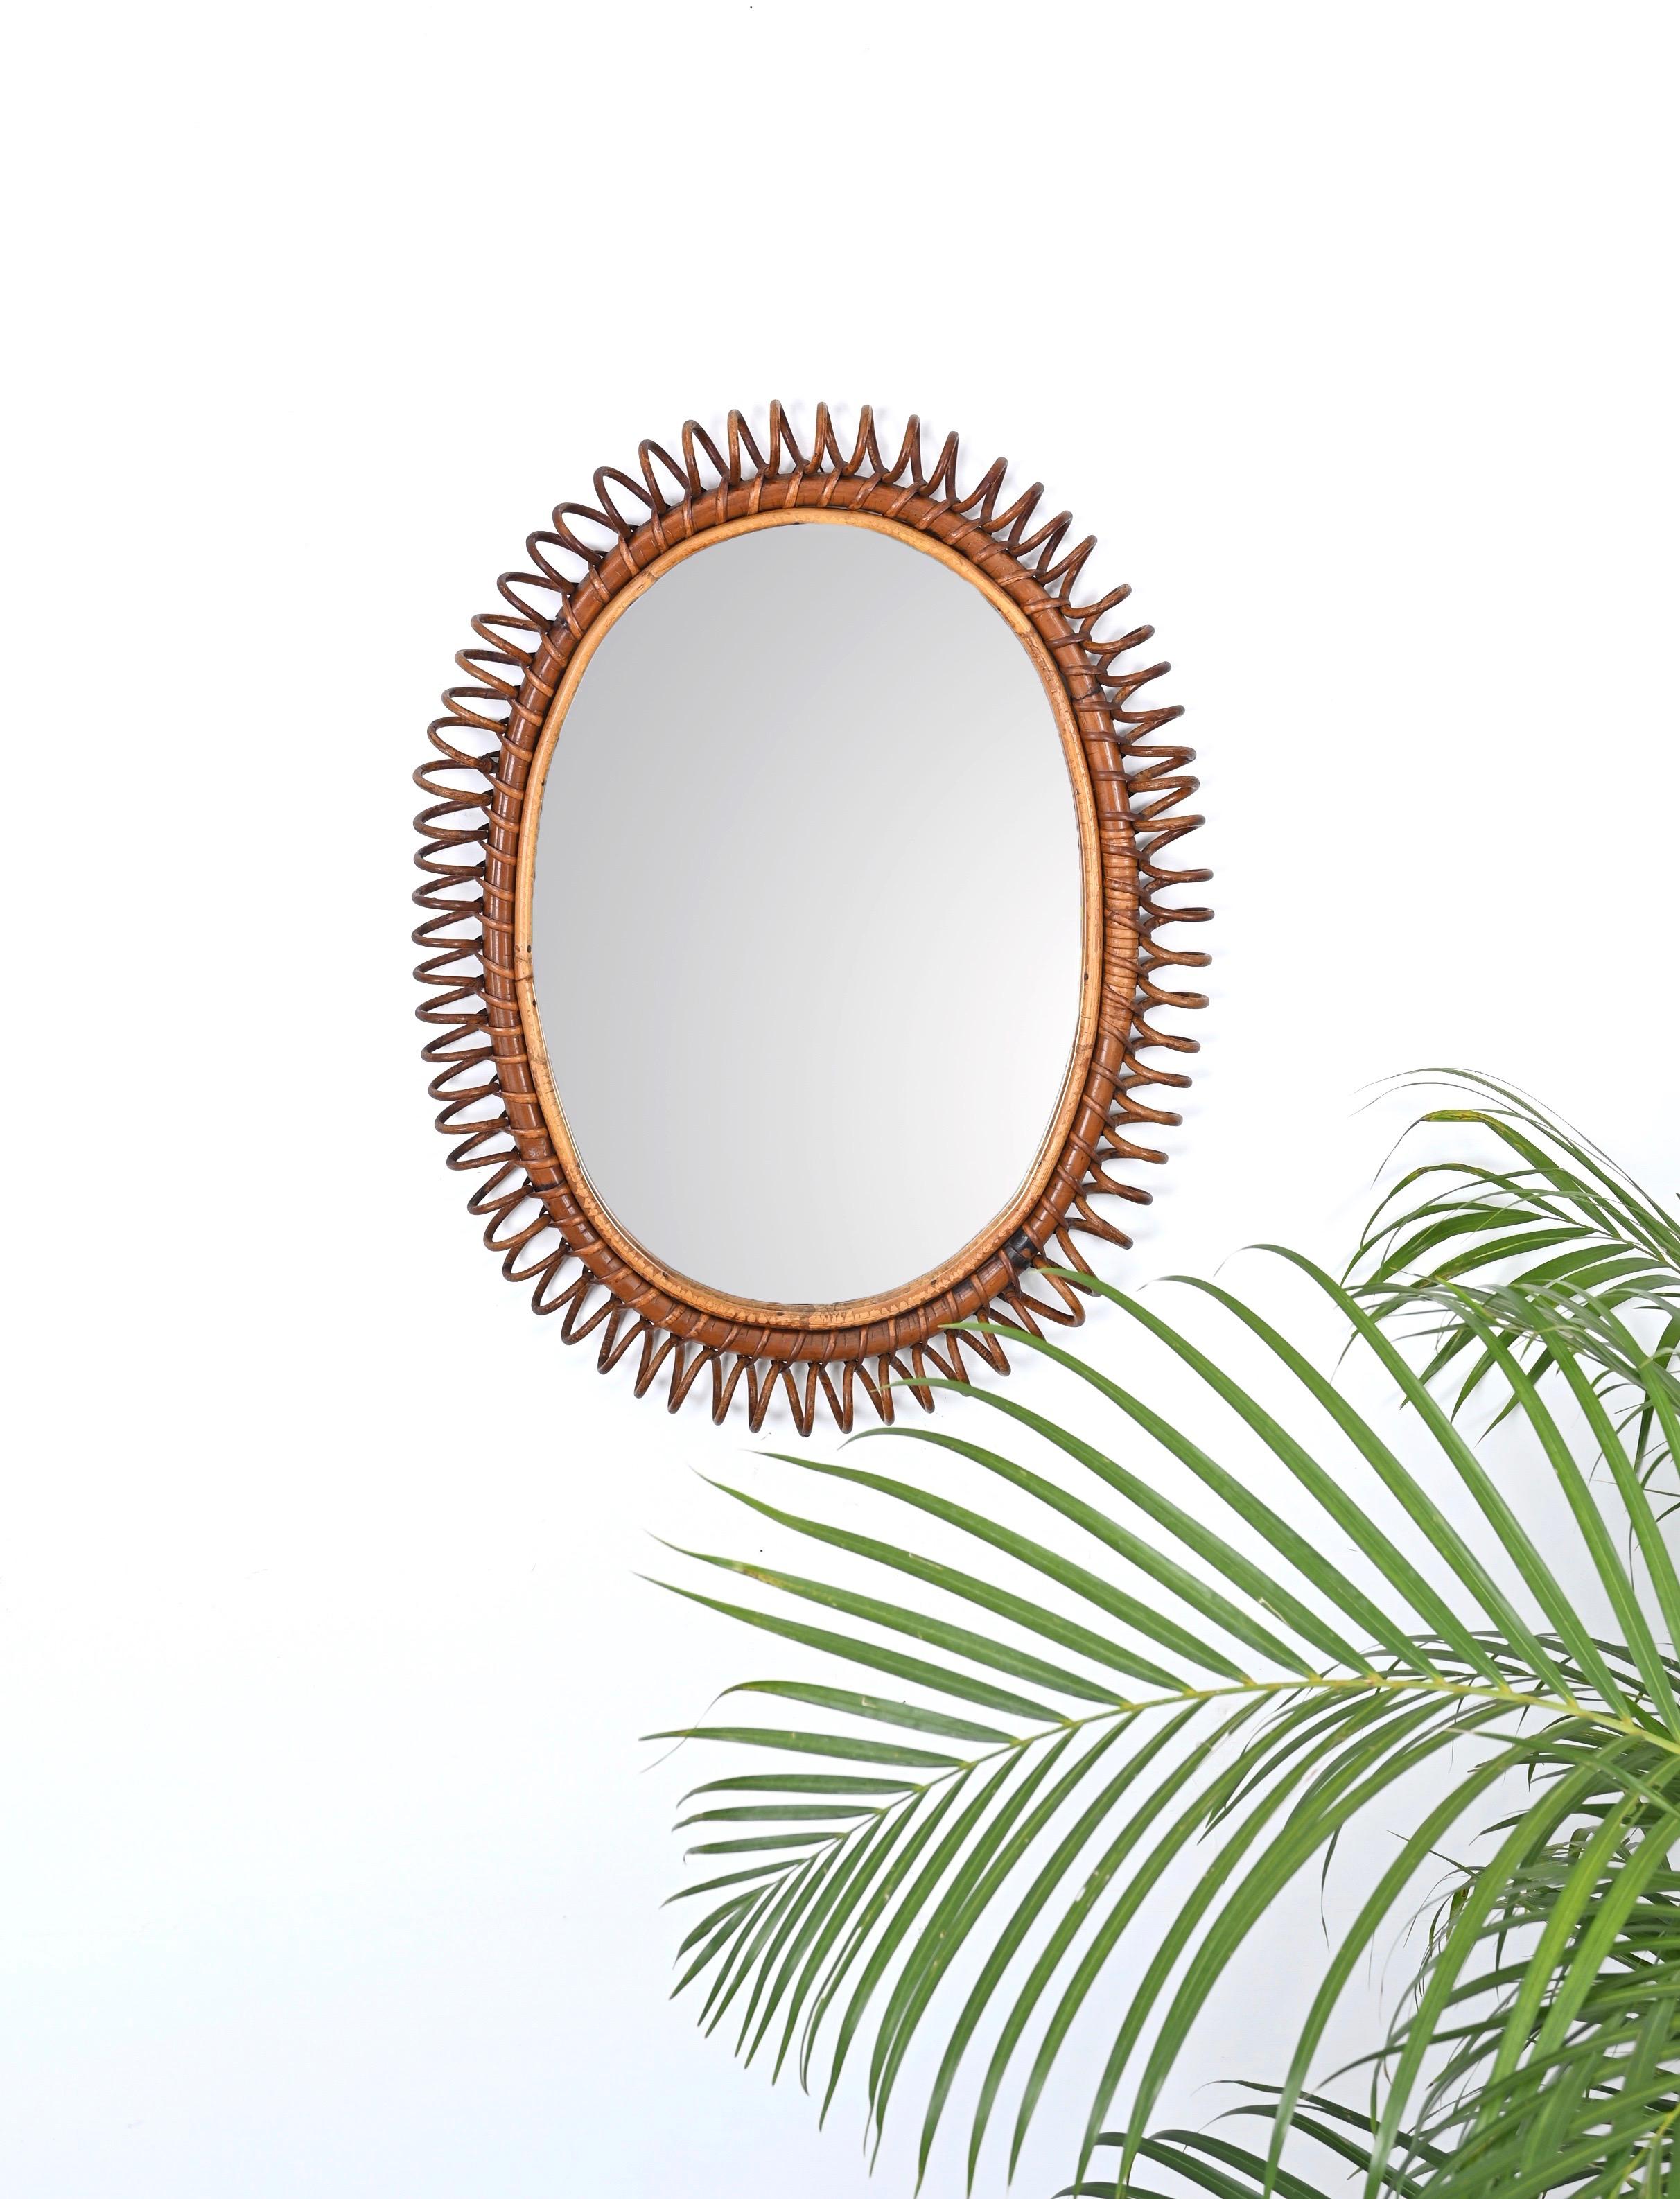 Marvelous midcentury oval mirror in curved rattan, bamboo and wicker. This fantastic piece was designed in Italy during the 1960s in Cote D'Azur style. 

This large mirror features a lovely spiral-shaped frame in curved rattan and wicker with an